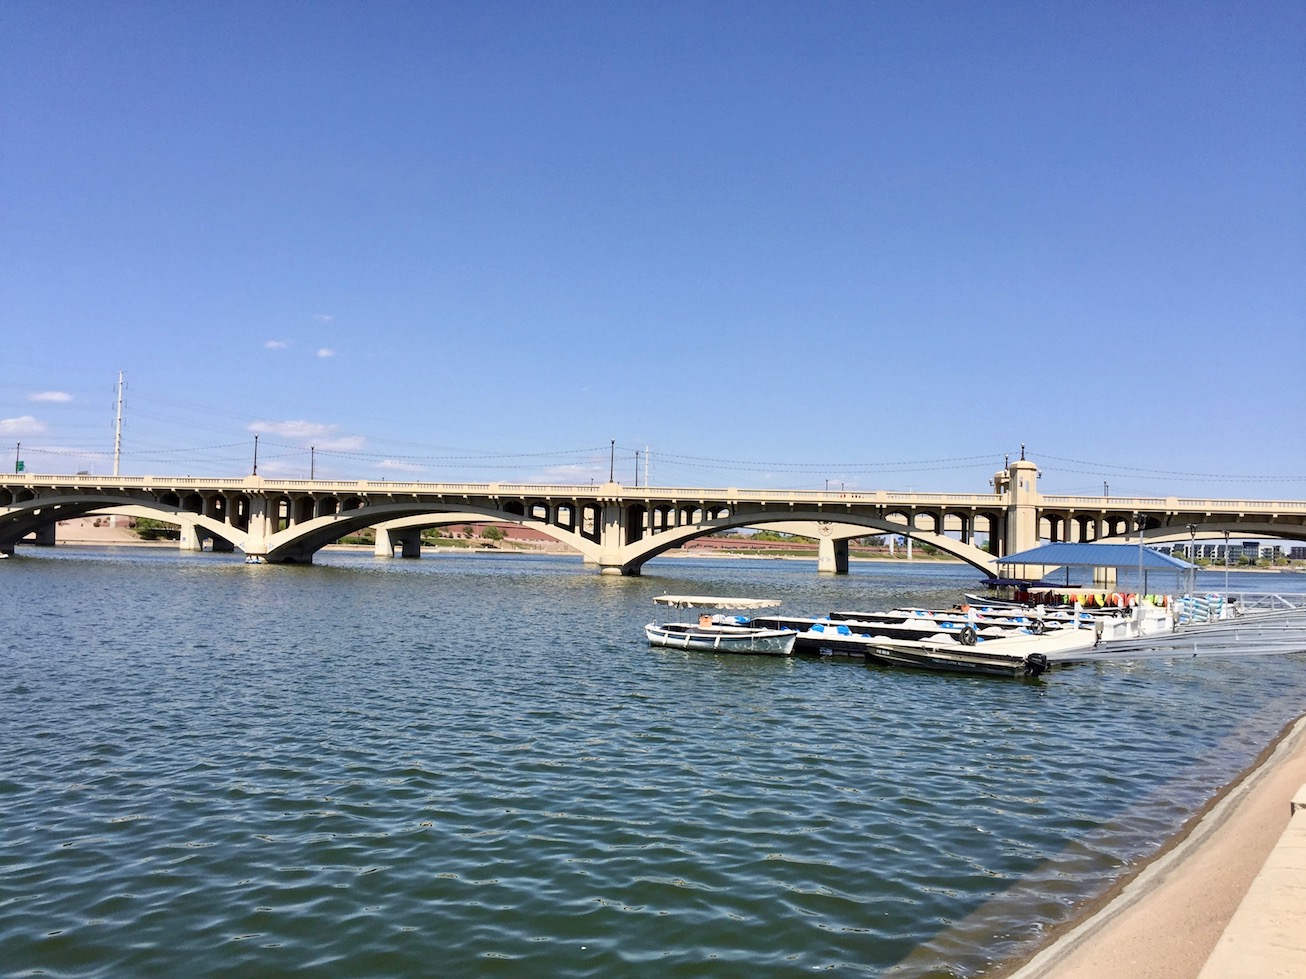 You might also be interested in Tempe Town Lake